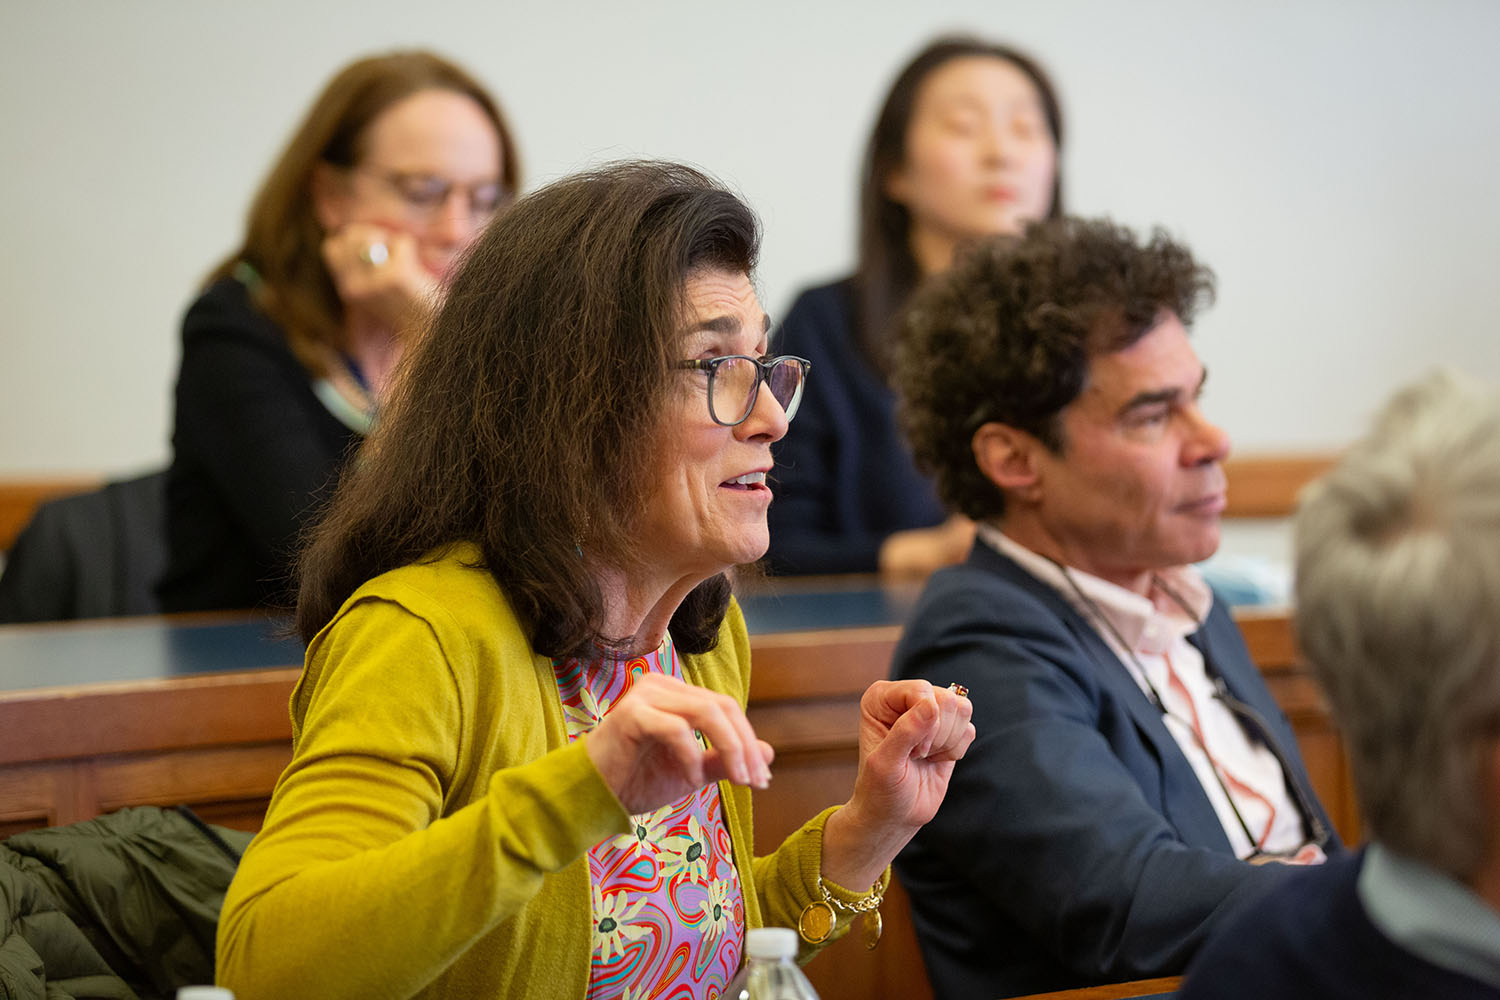 Marianna Ayres (left) asking a question, while Yale Econ. Prof. John Geanakoplos (right) listens